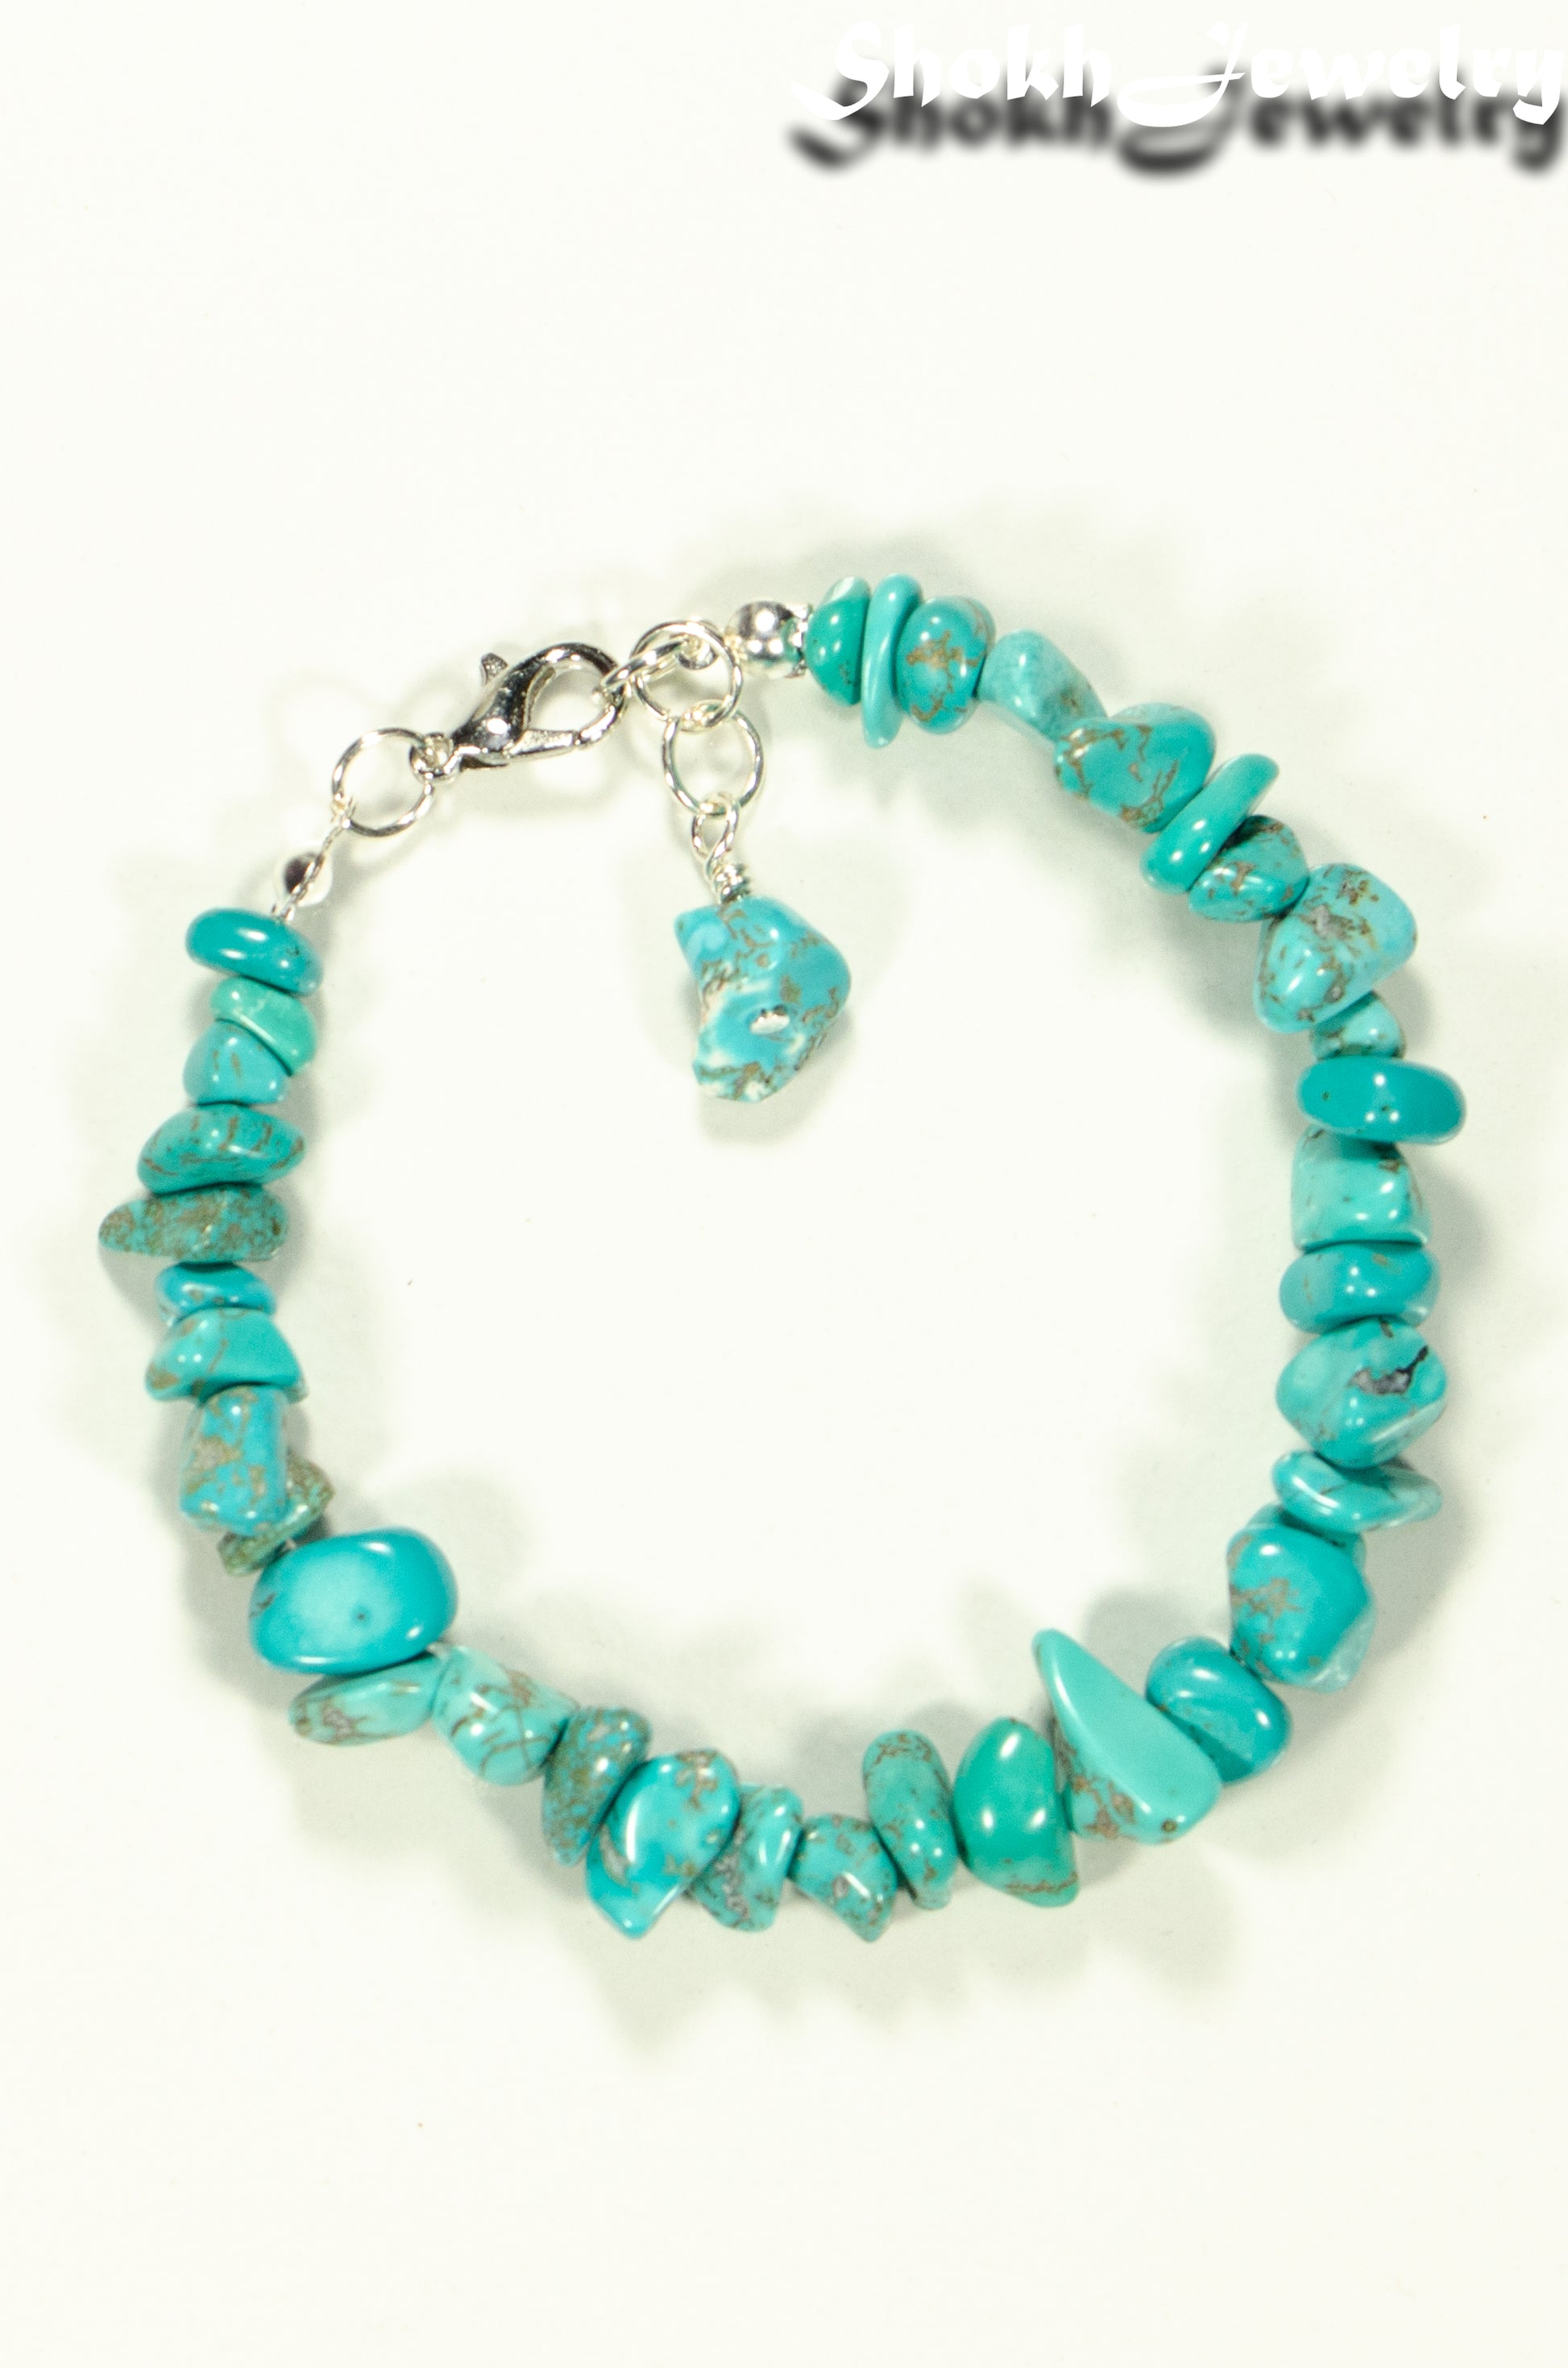 Top view of Natural Turquoise Crystal Chip Bracelet.